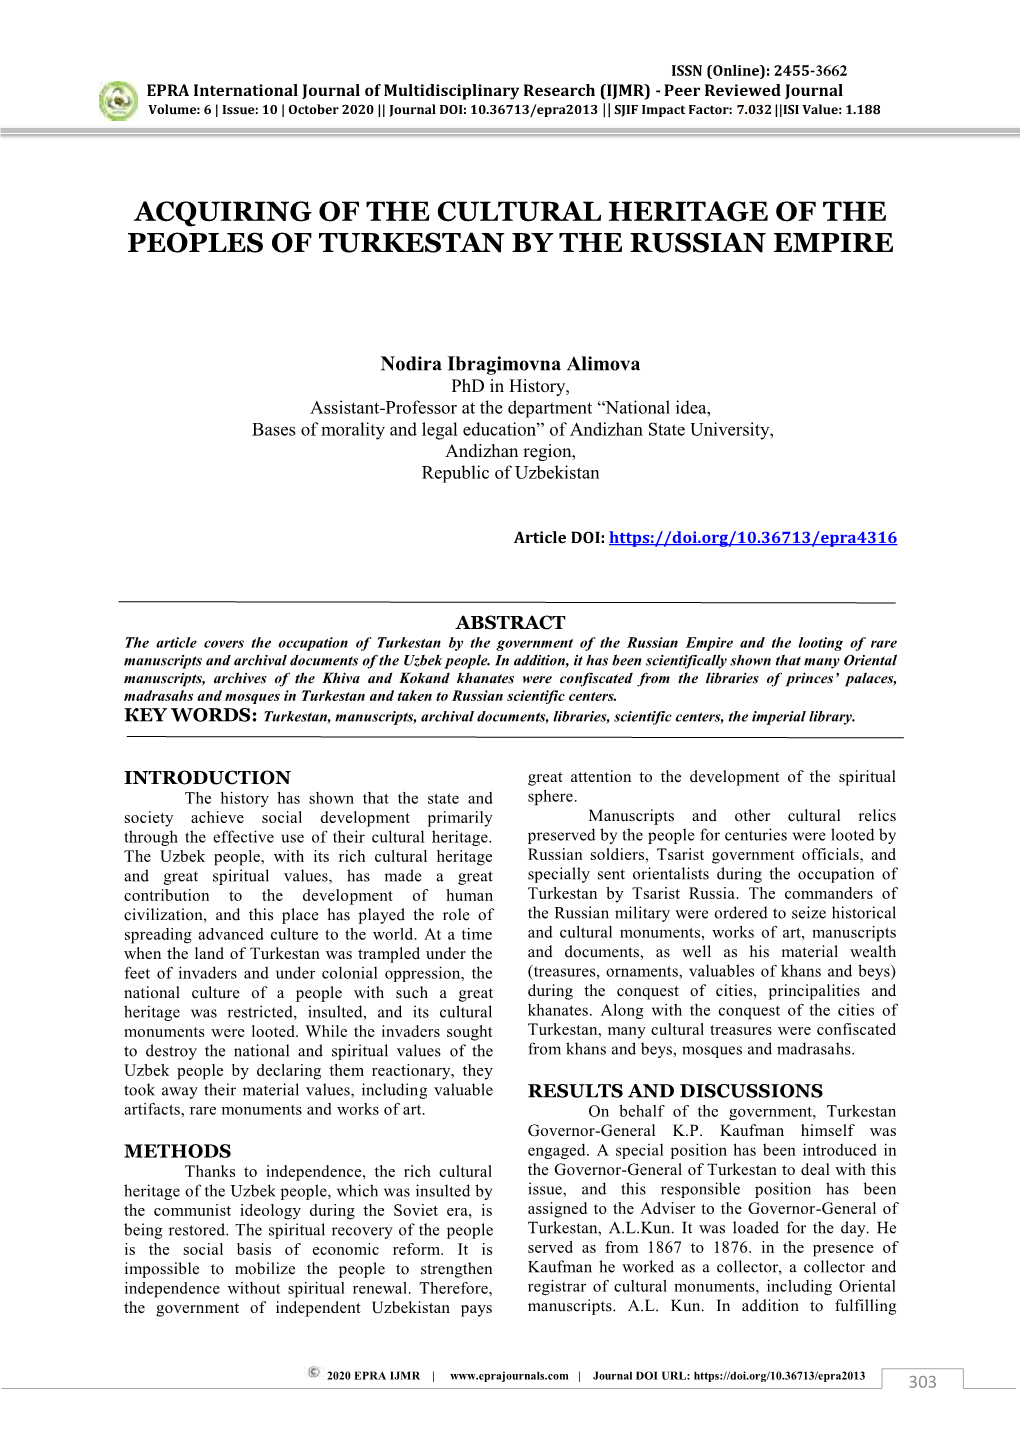 Acquiring of the Cultural Heritage of the Peoples of Turkestan by the Russian Empire